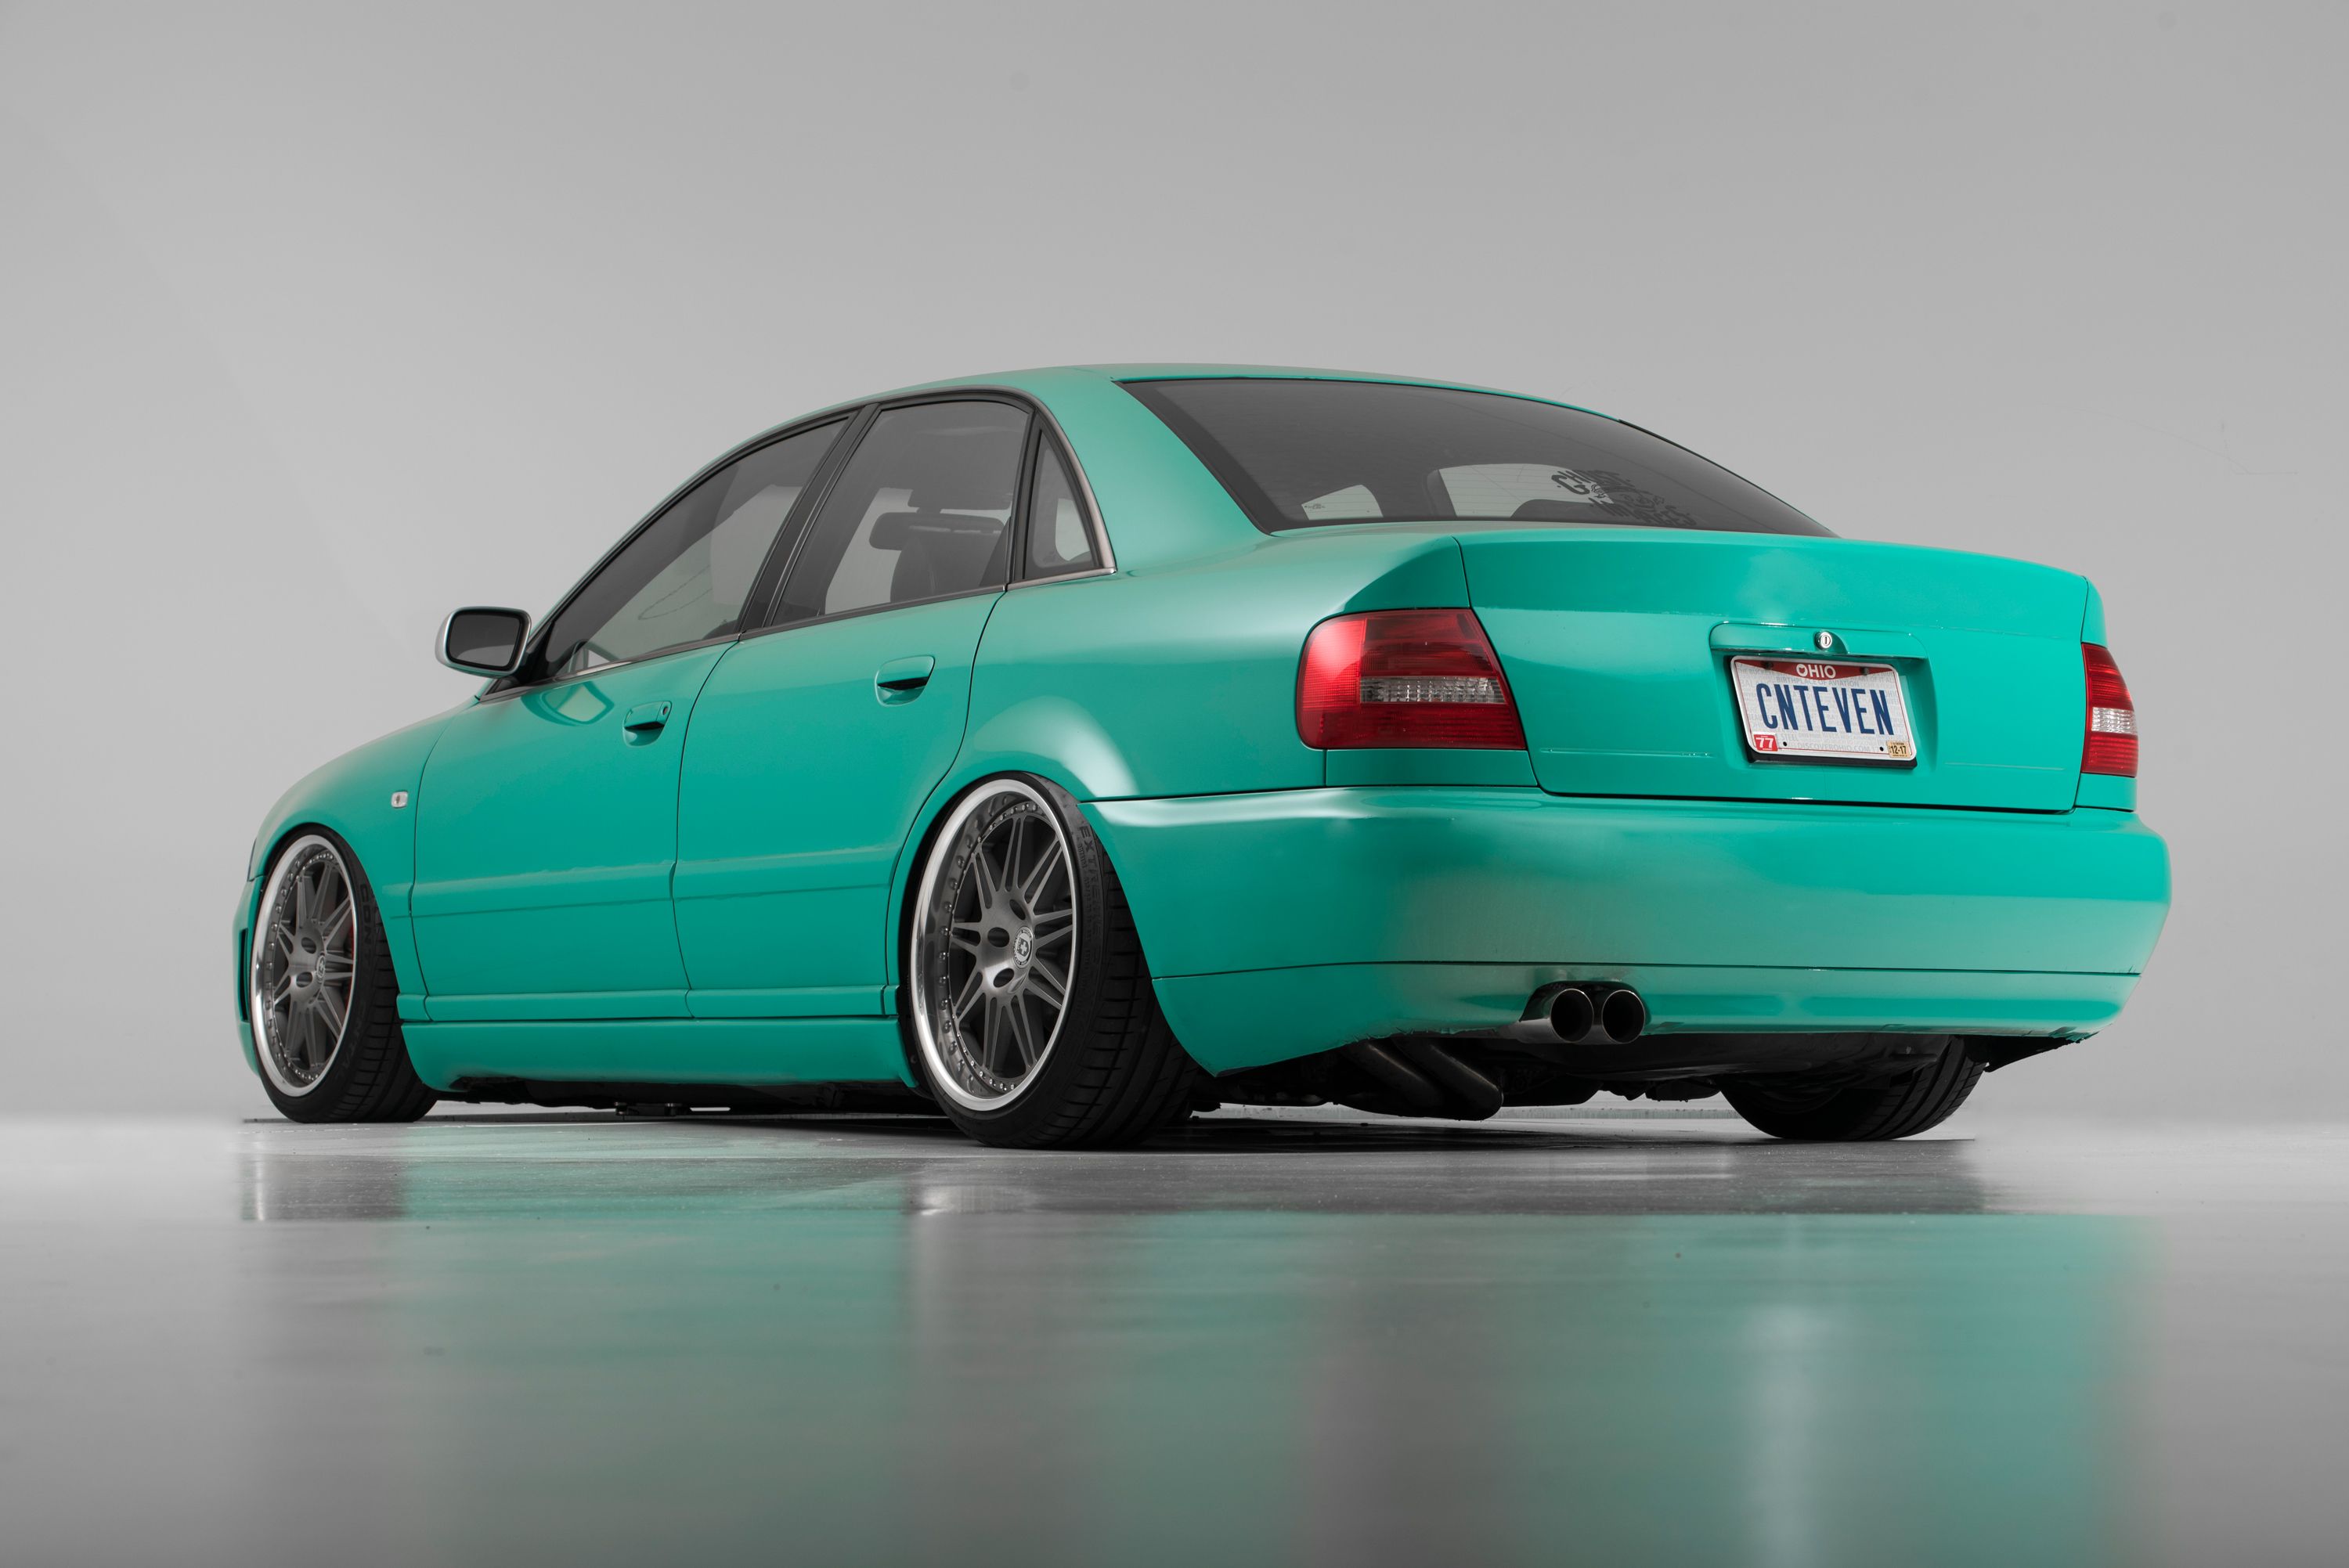 Wallpaper Wednesday: Your New B5 S4 Desktop and Phone Background